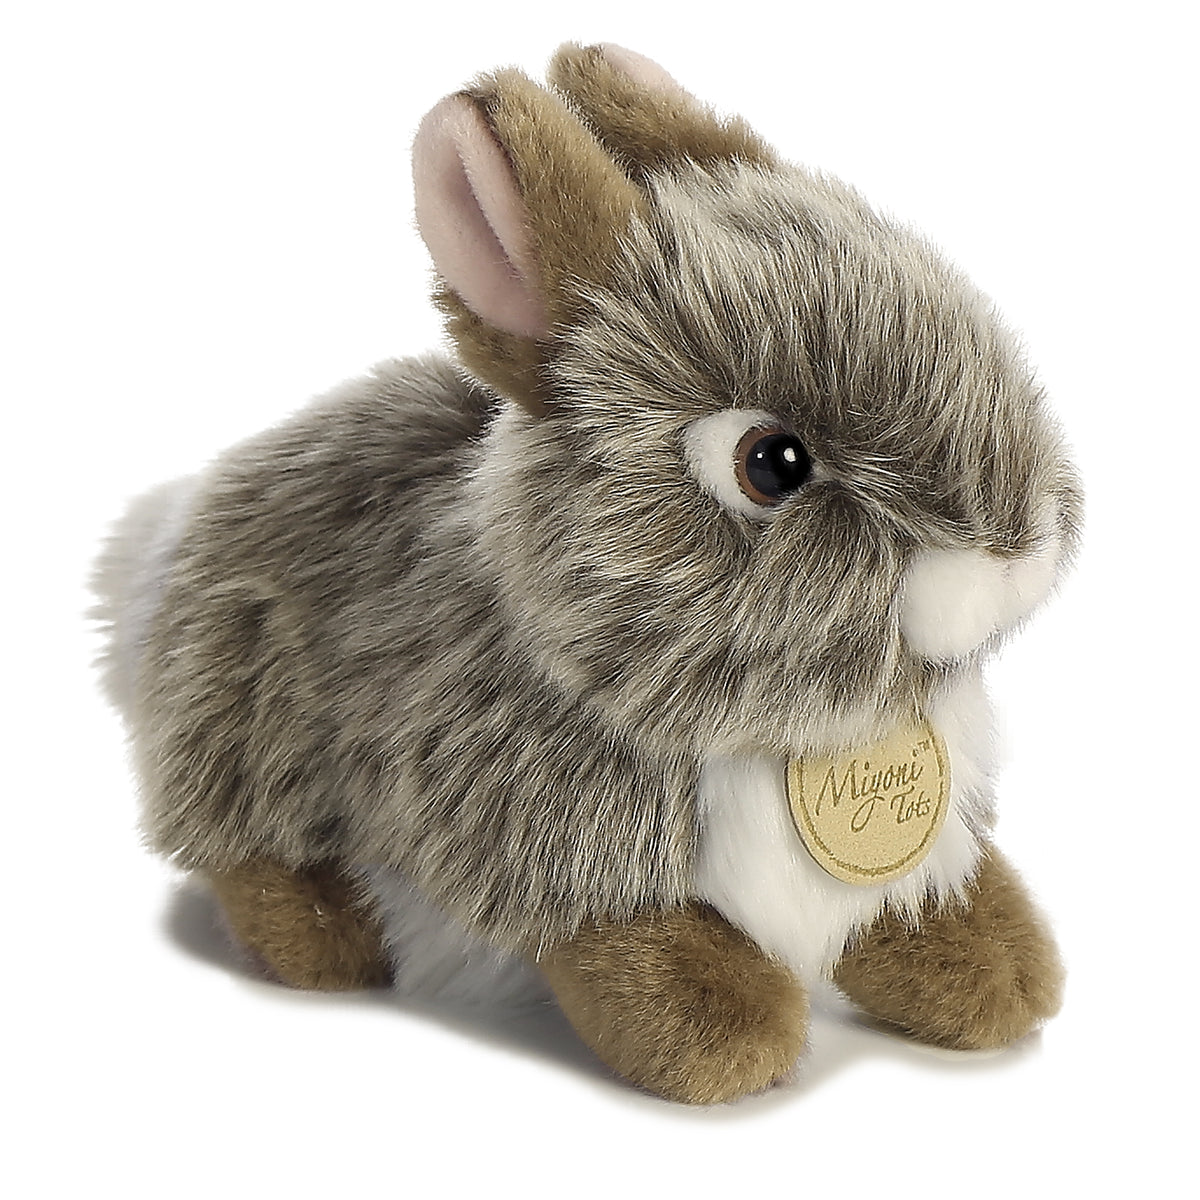 Grey Baby Bunny plush from Miyoni by Aurora, featuring realistic soft grey fur and bright eyes